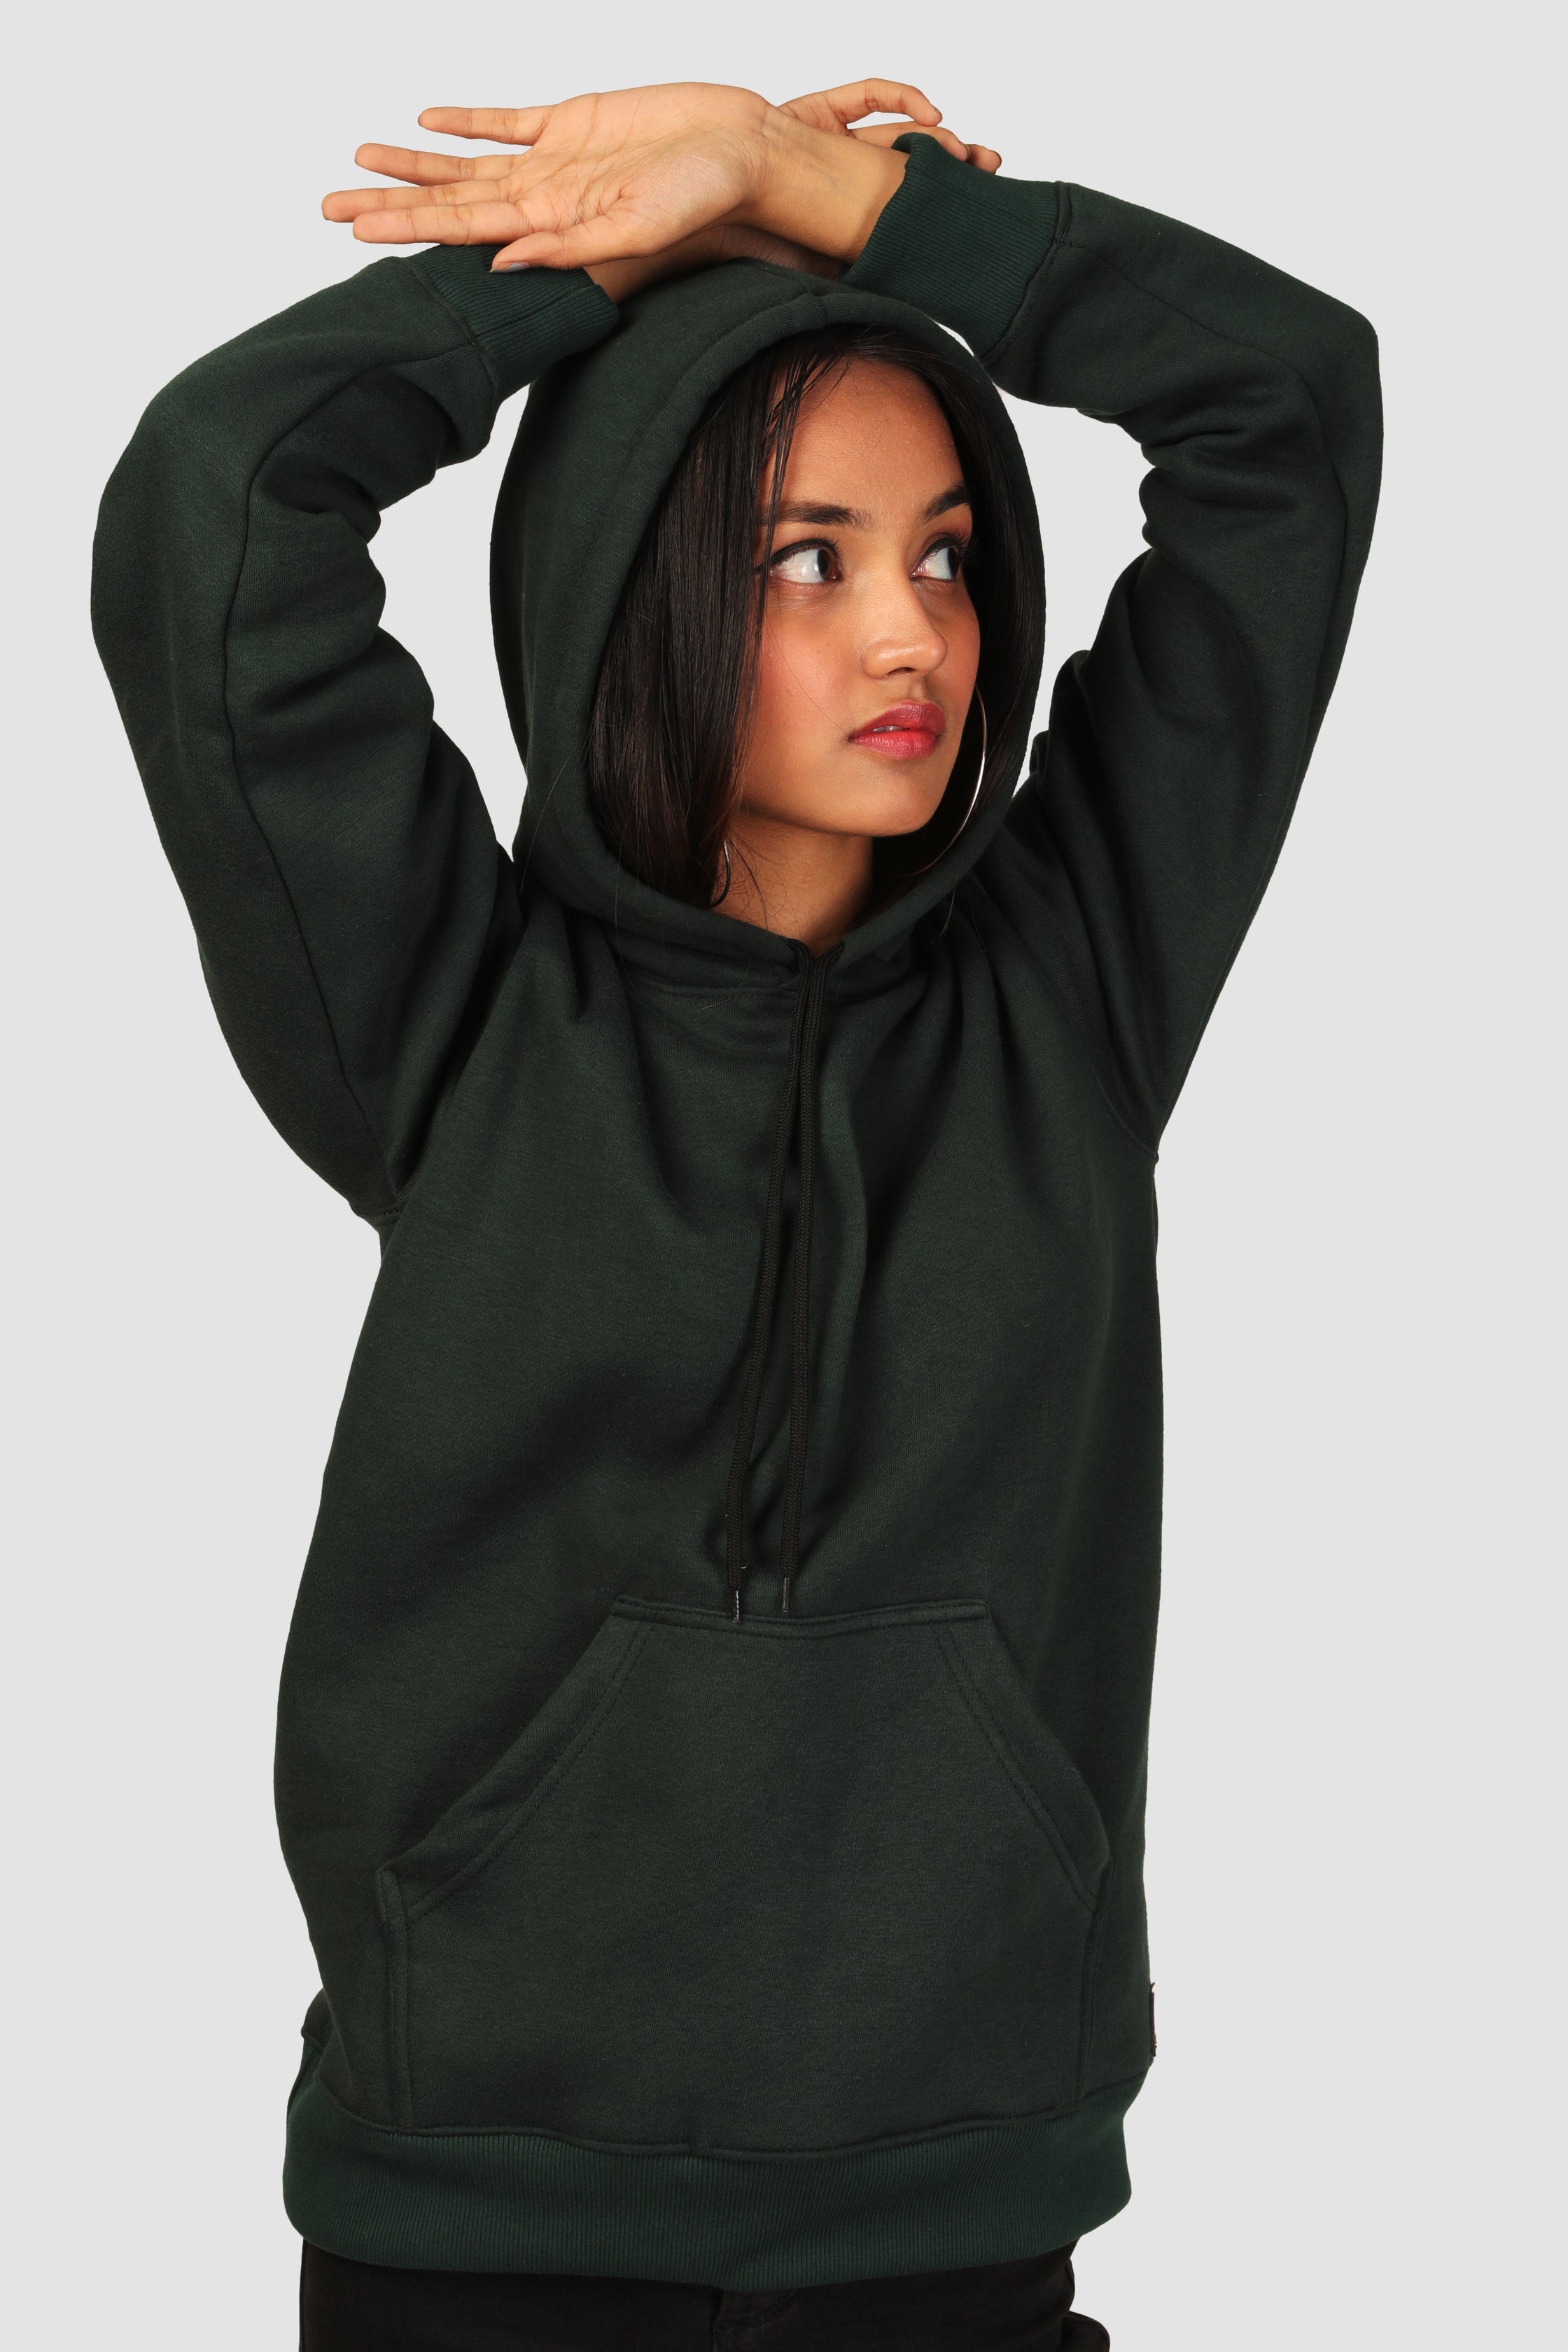 WALLY - GREEN VELOUR SOLID WOMENS HOODIE